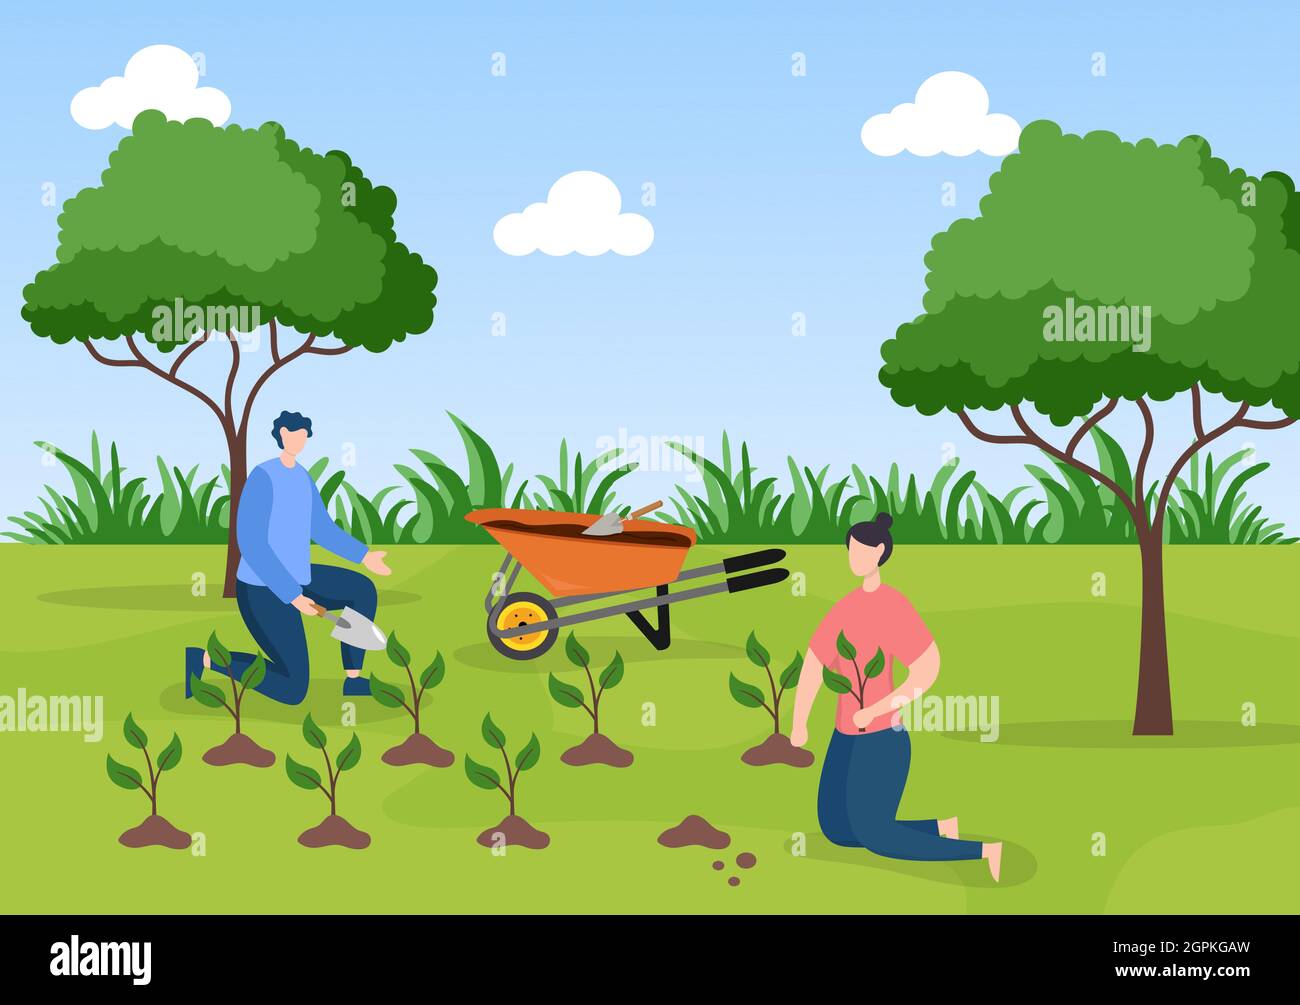 People Planting Trees Flat Cartoon Vector Illustration With Gardening,  Farming and Agriculture Use Tree Roots or a Shovel For Caring Environment  Stock Vector Image & Art - Alamy